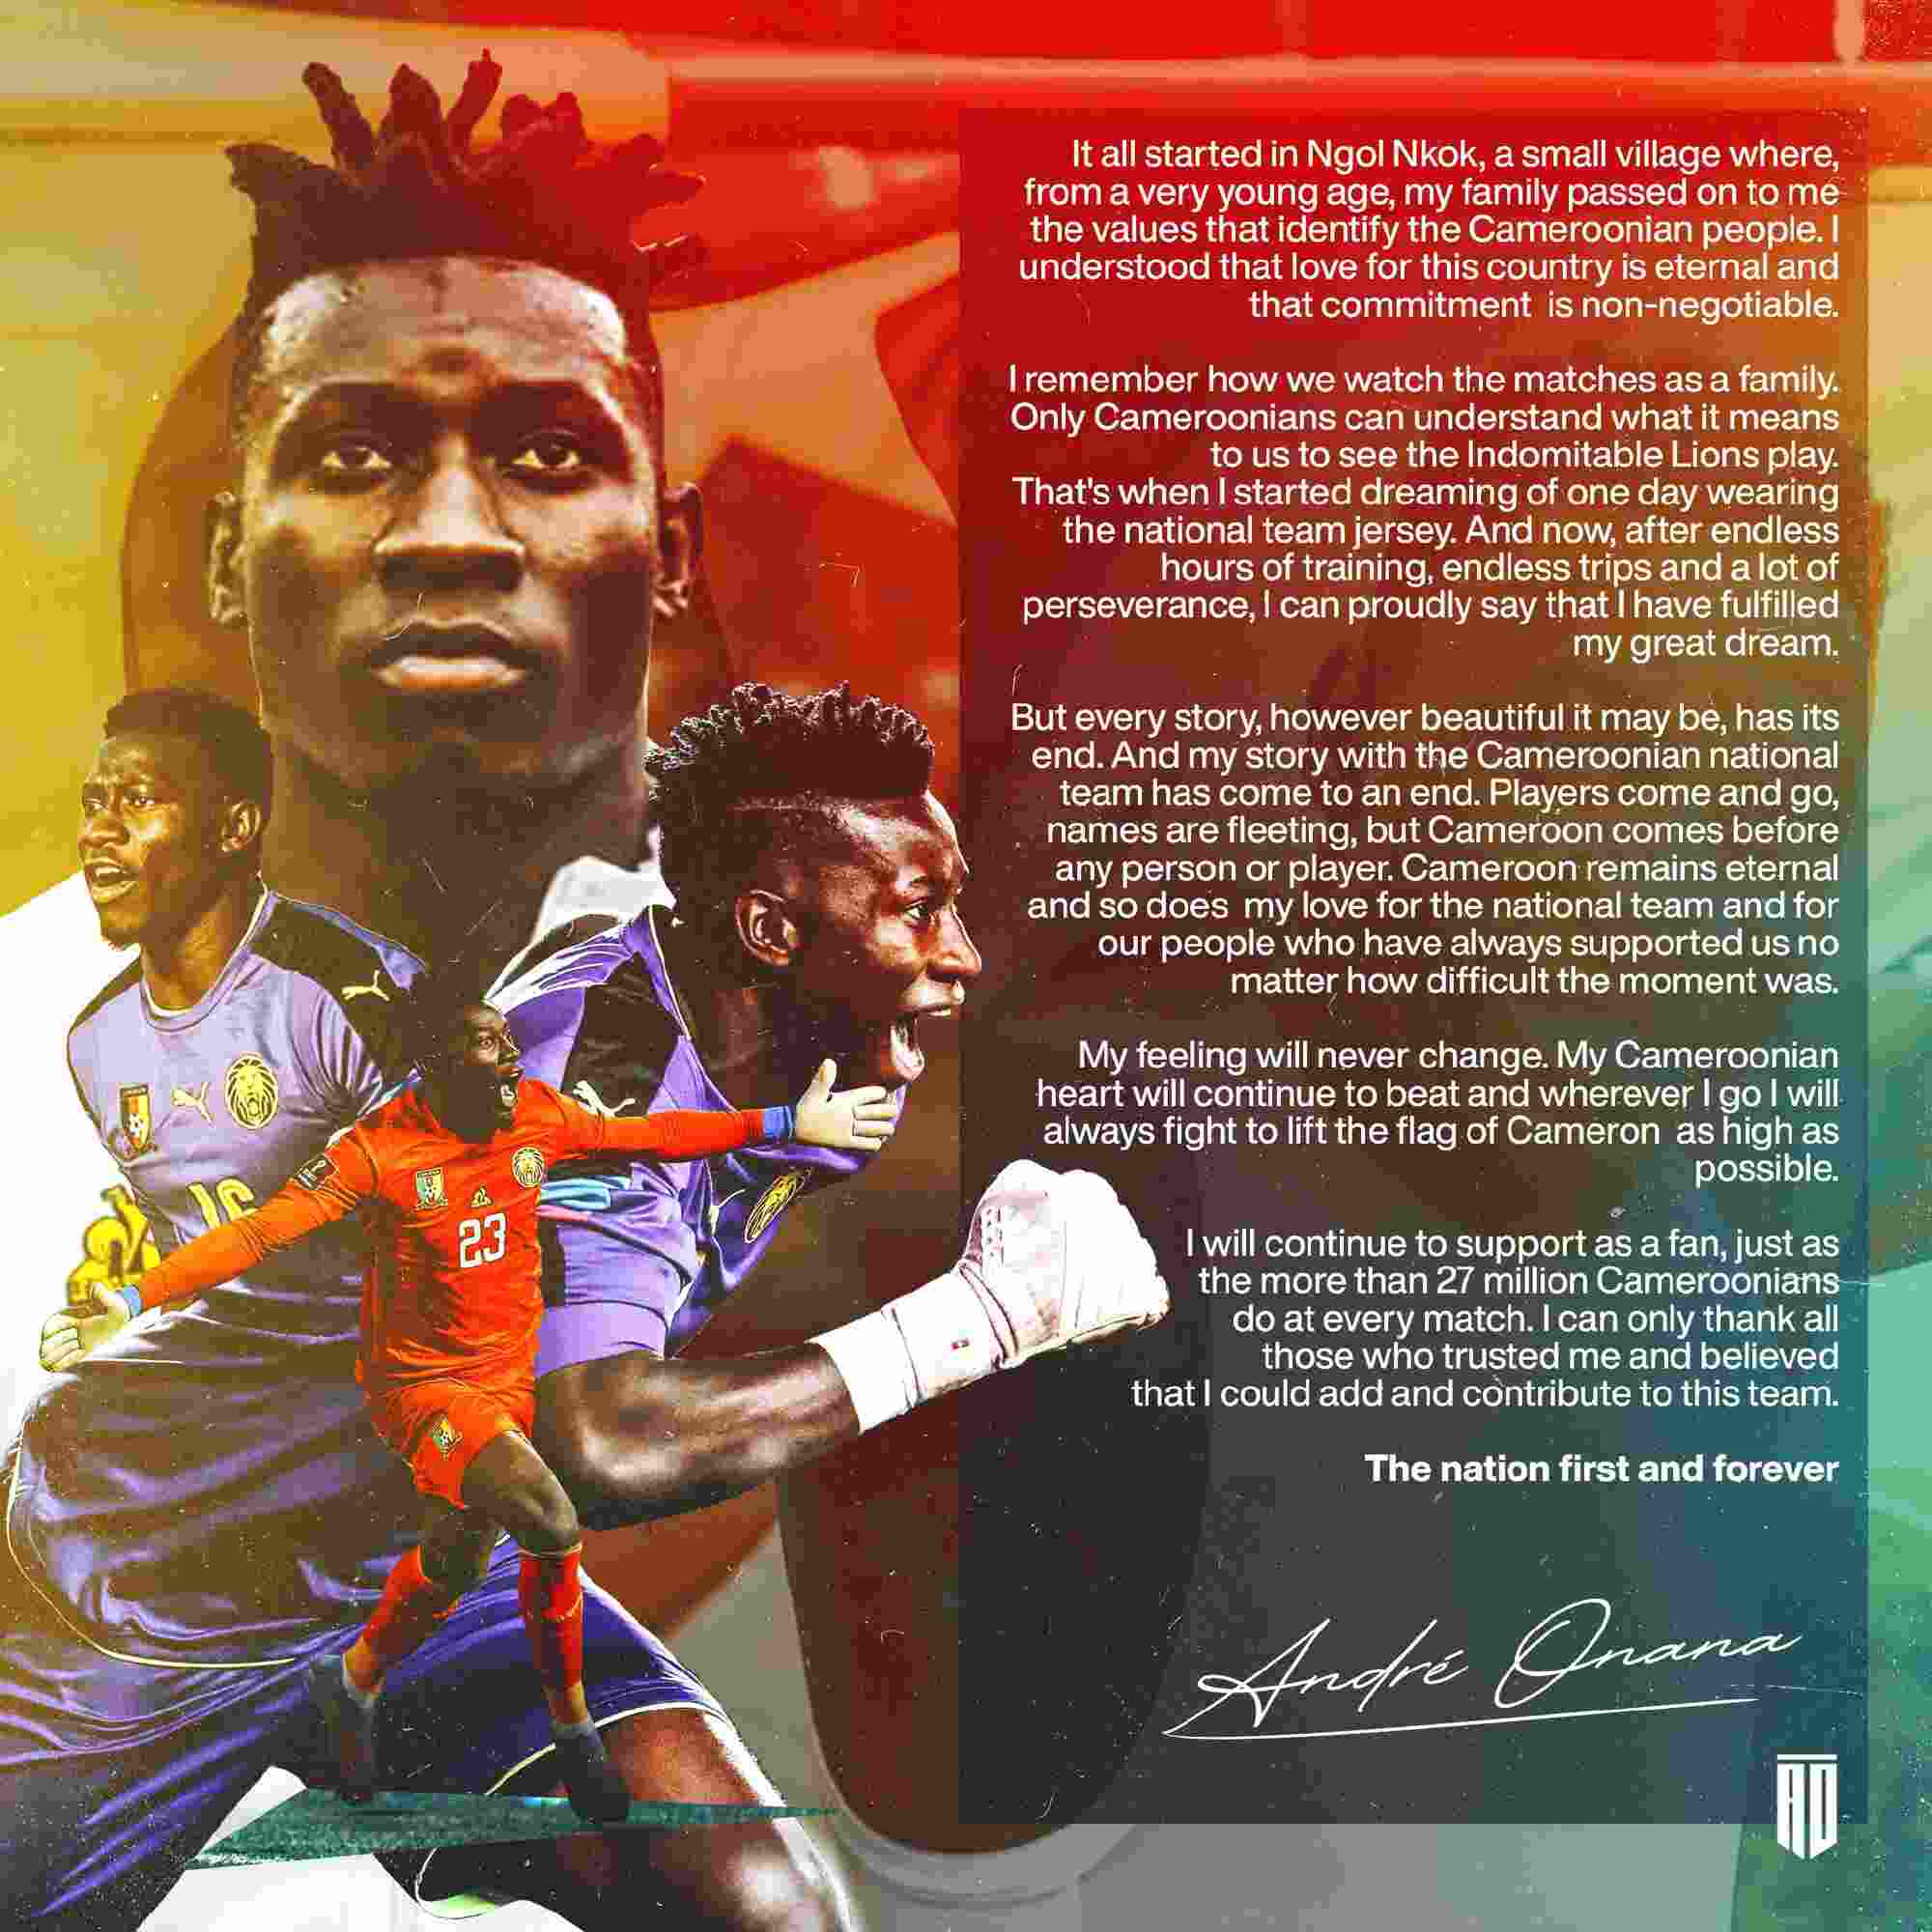 Andre Onana retires from international football after World Cup fallout with Cameroon's coach Rigobert Song